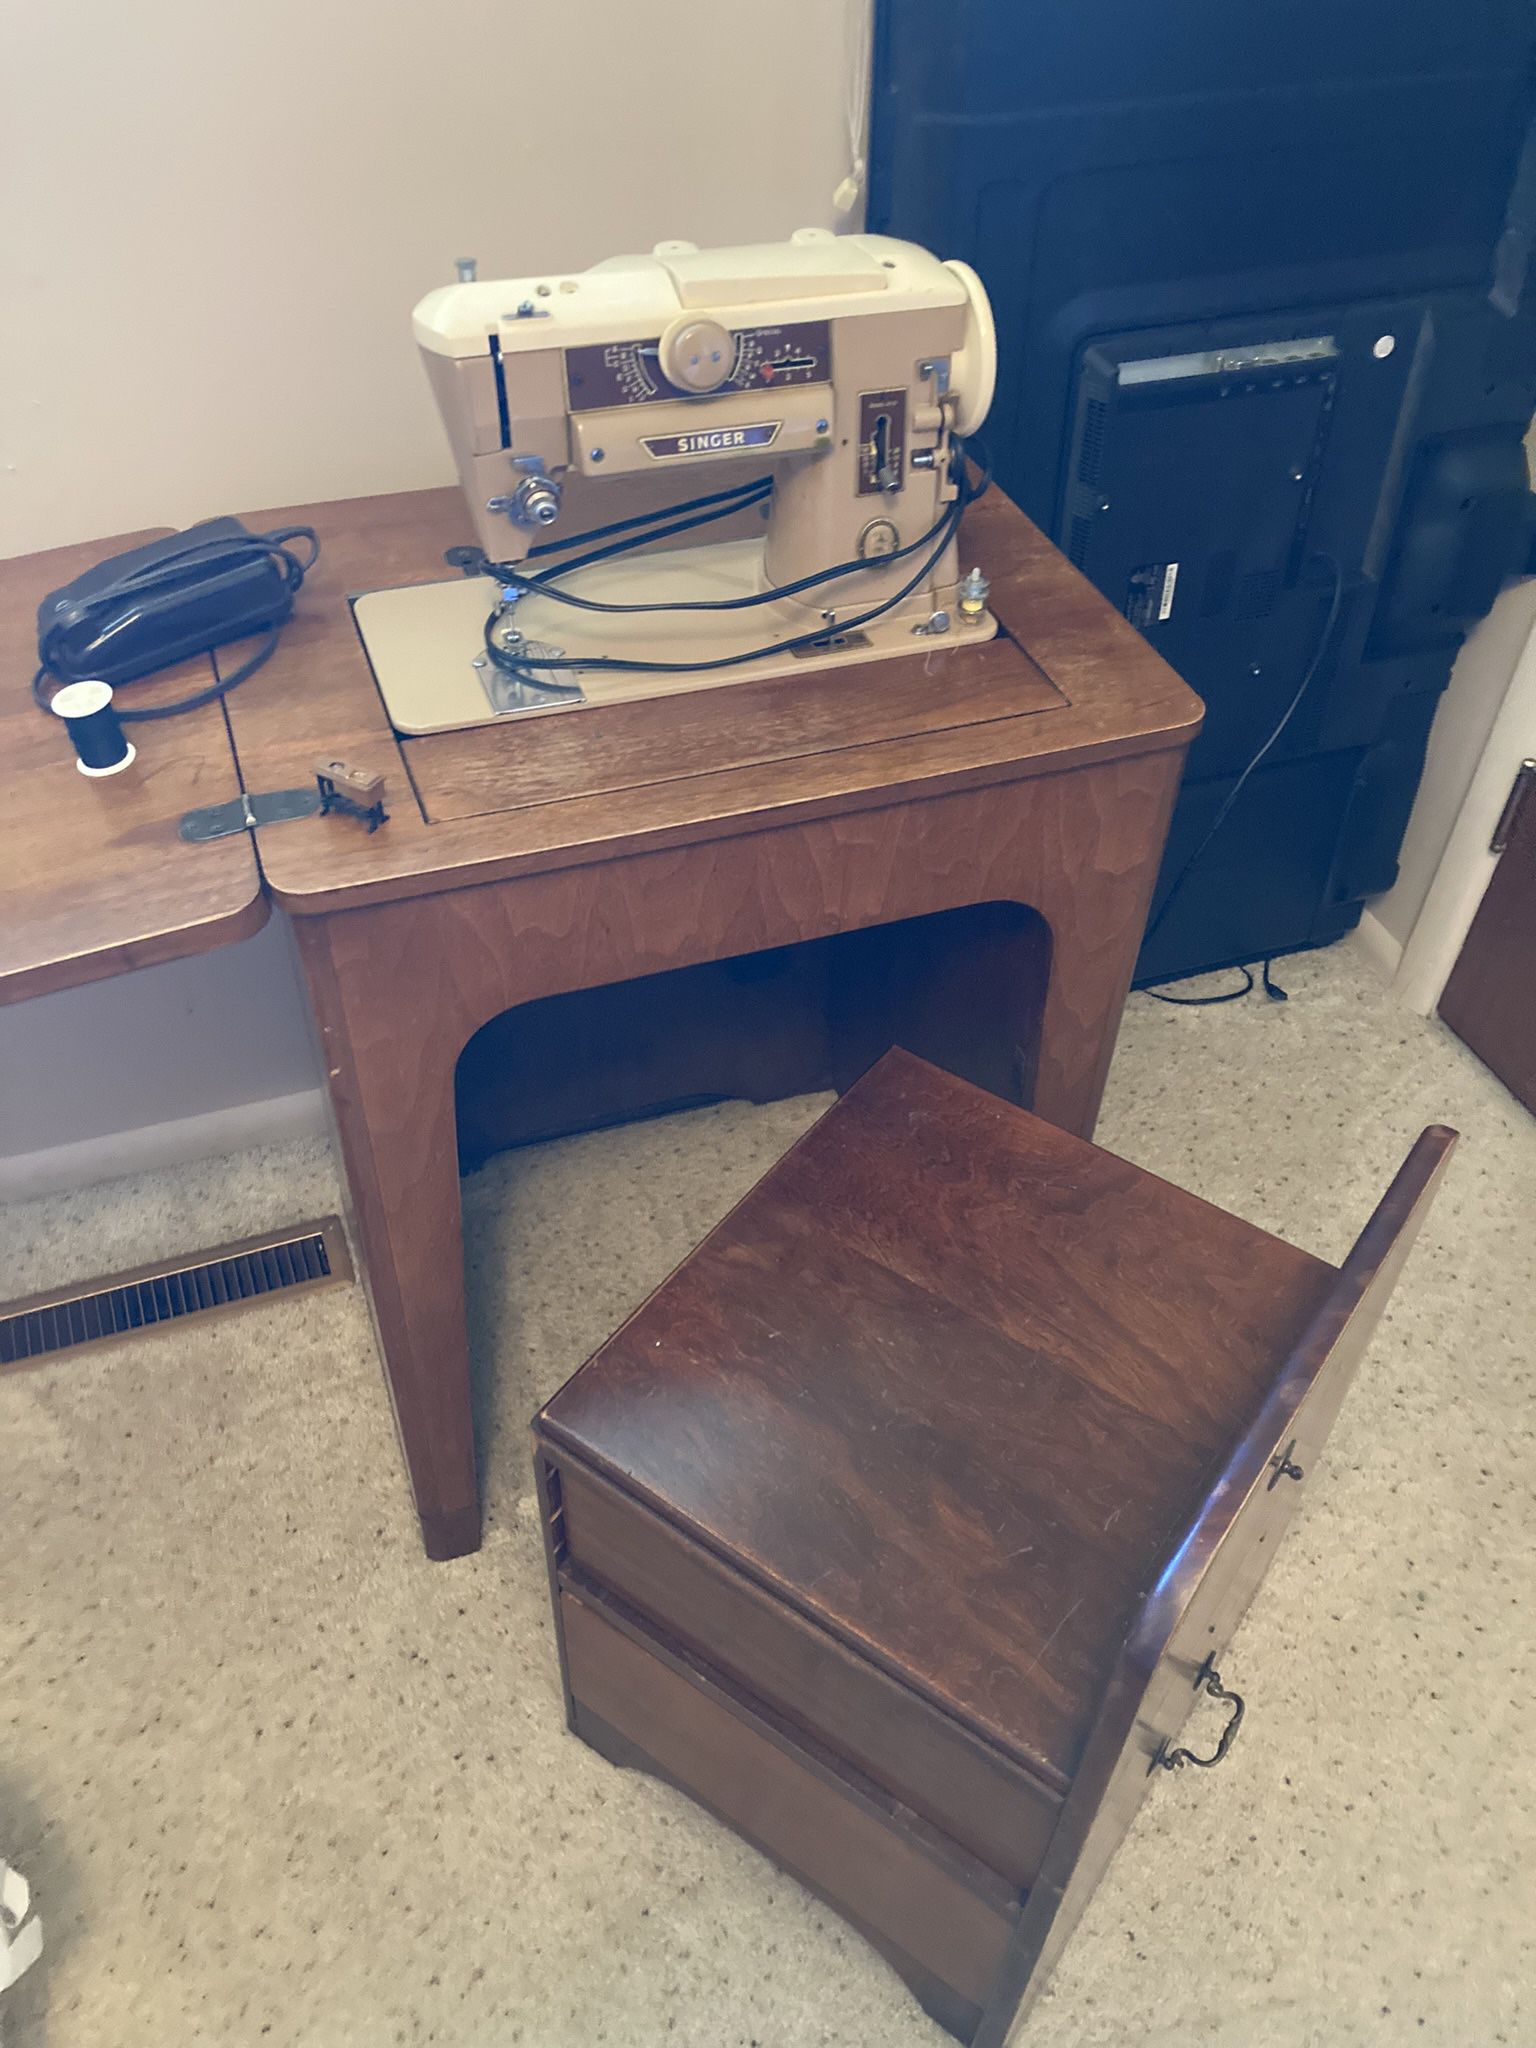 Singer Model 401A Sewing Machine 